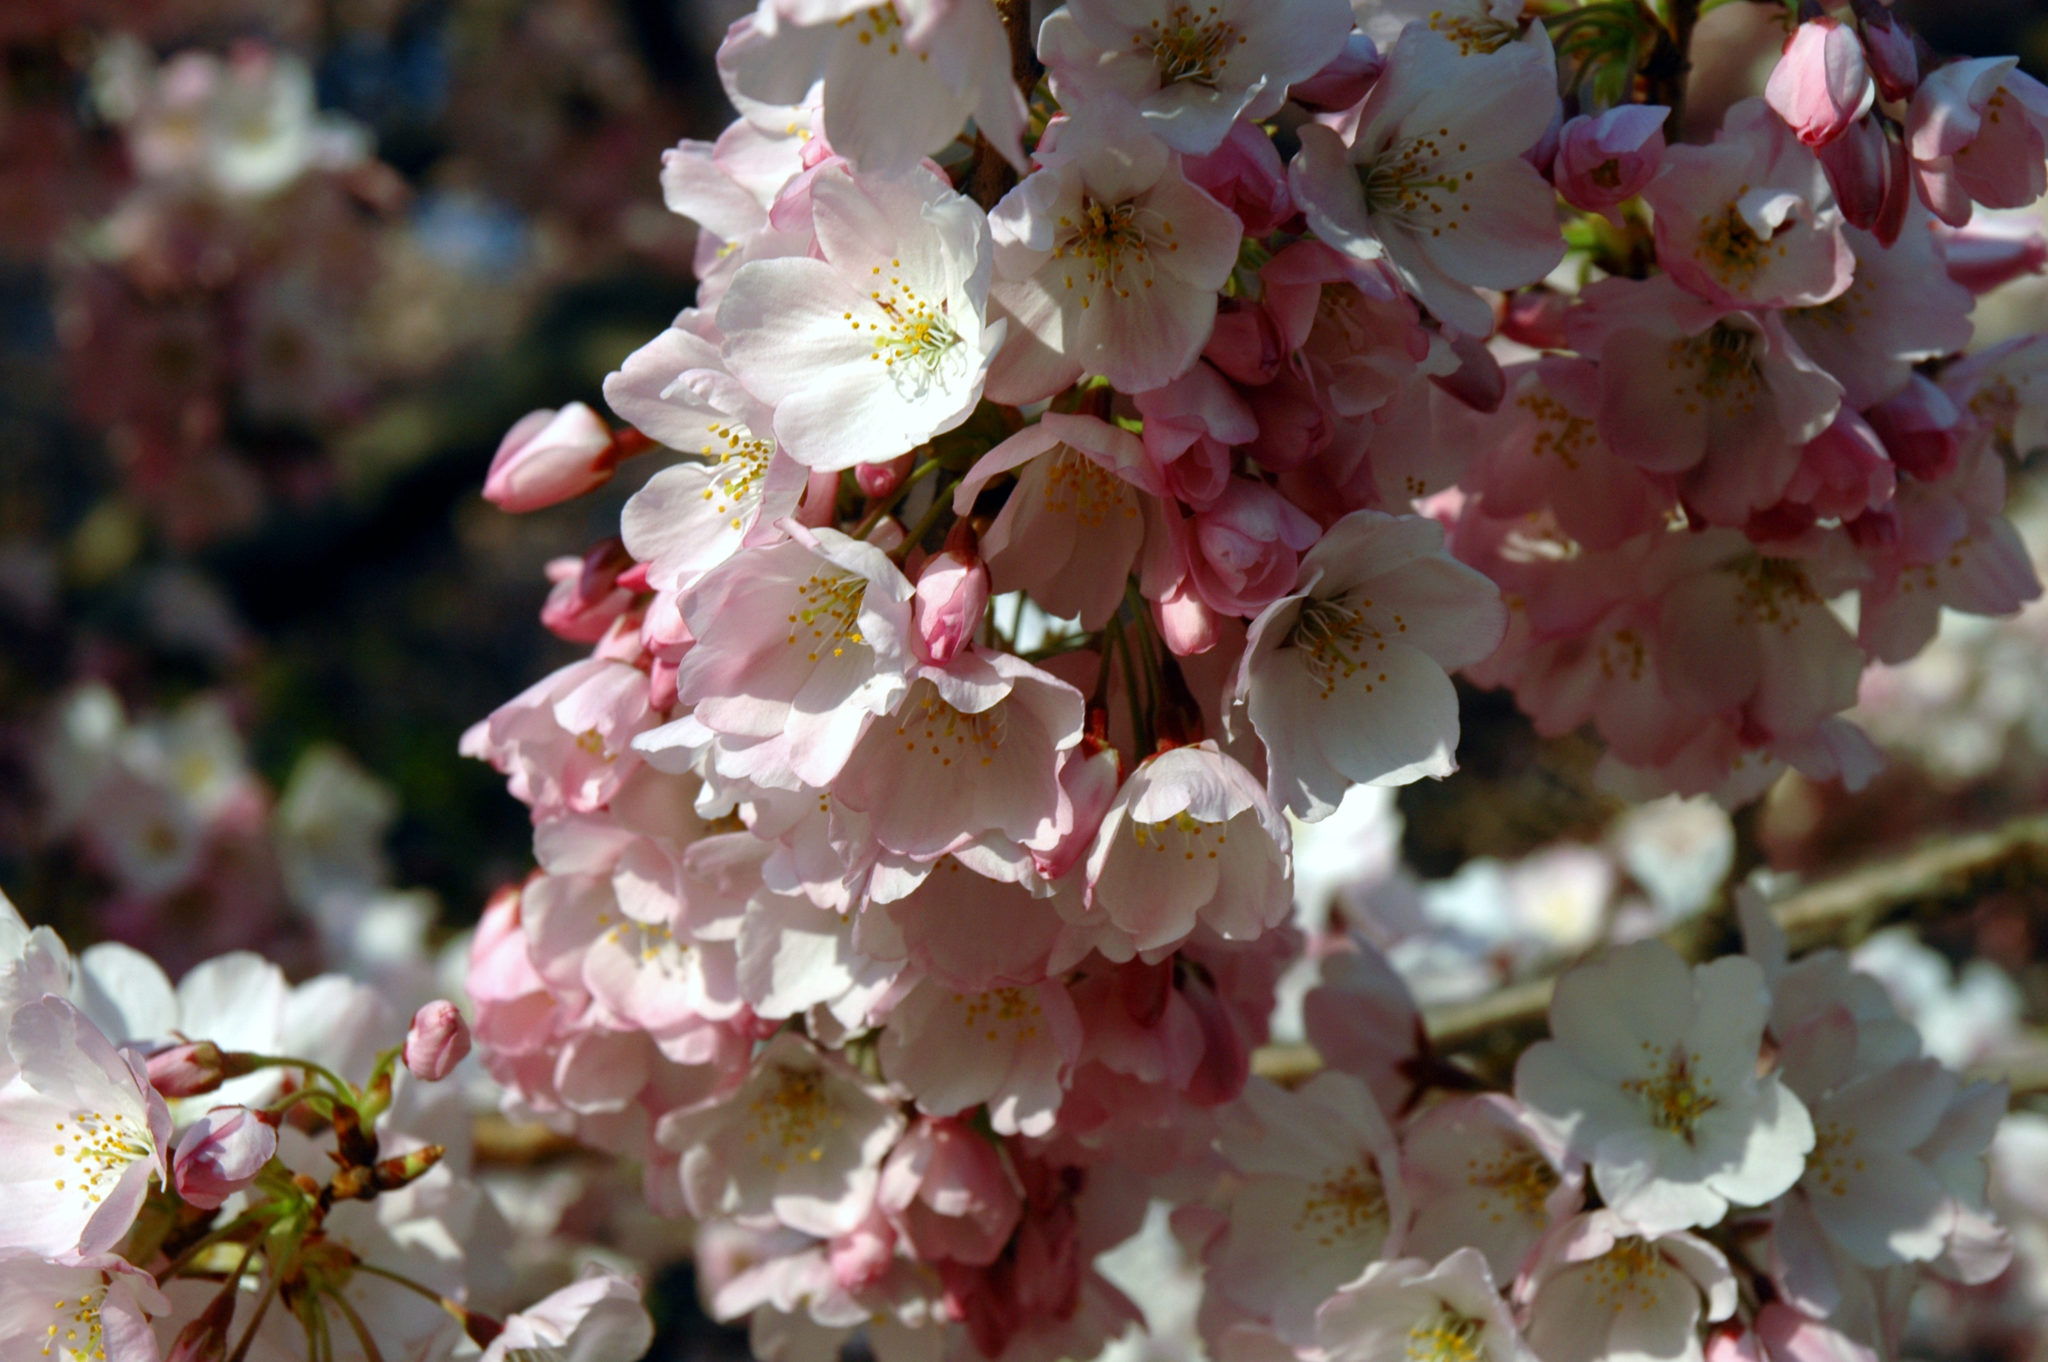 Book Early for the National Cherry Blossom Festival and Save